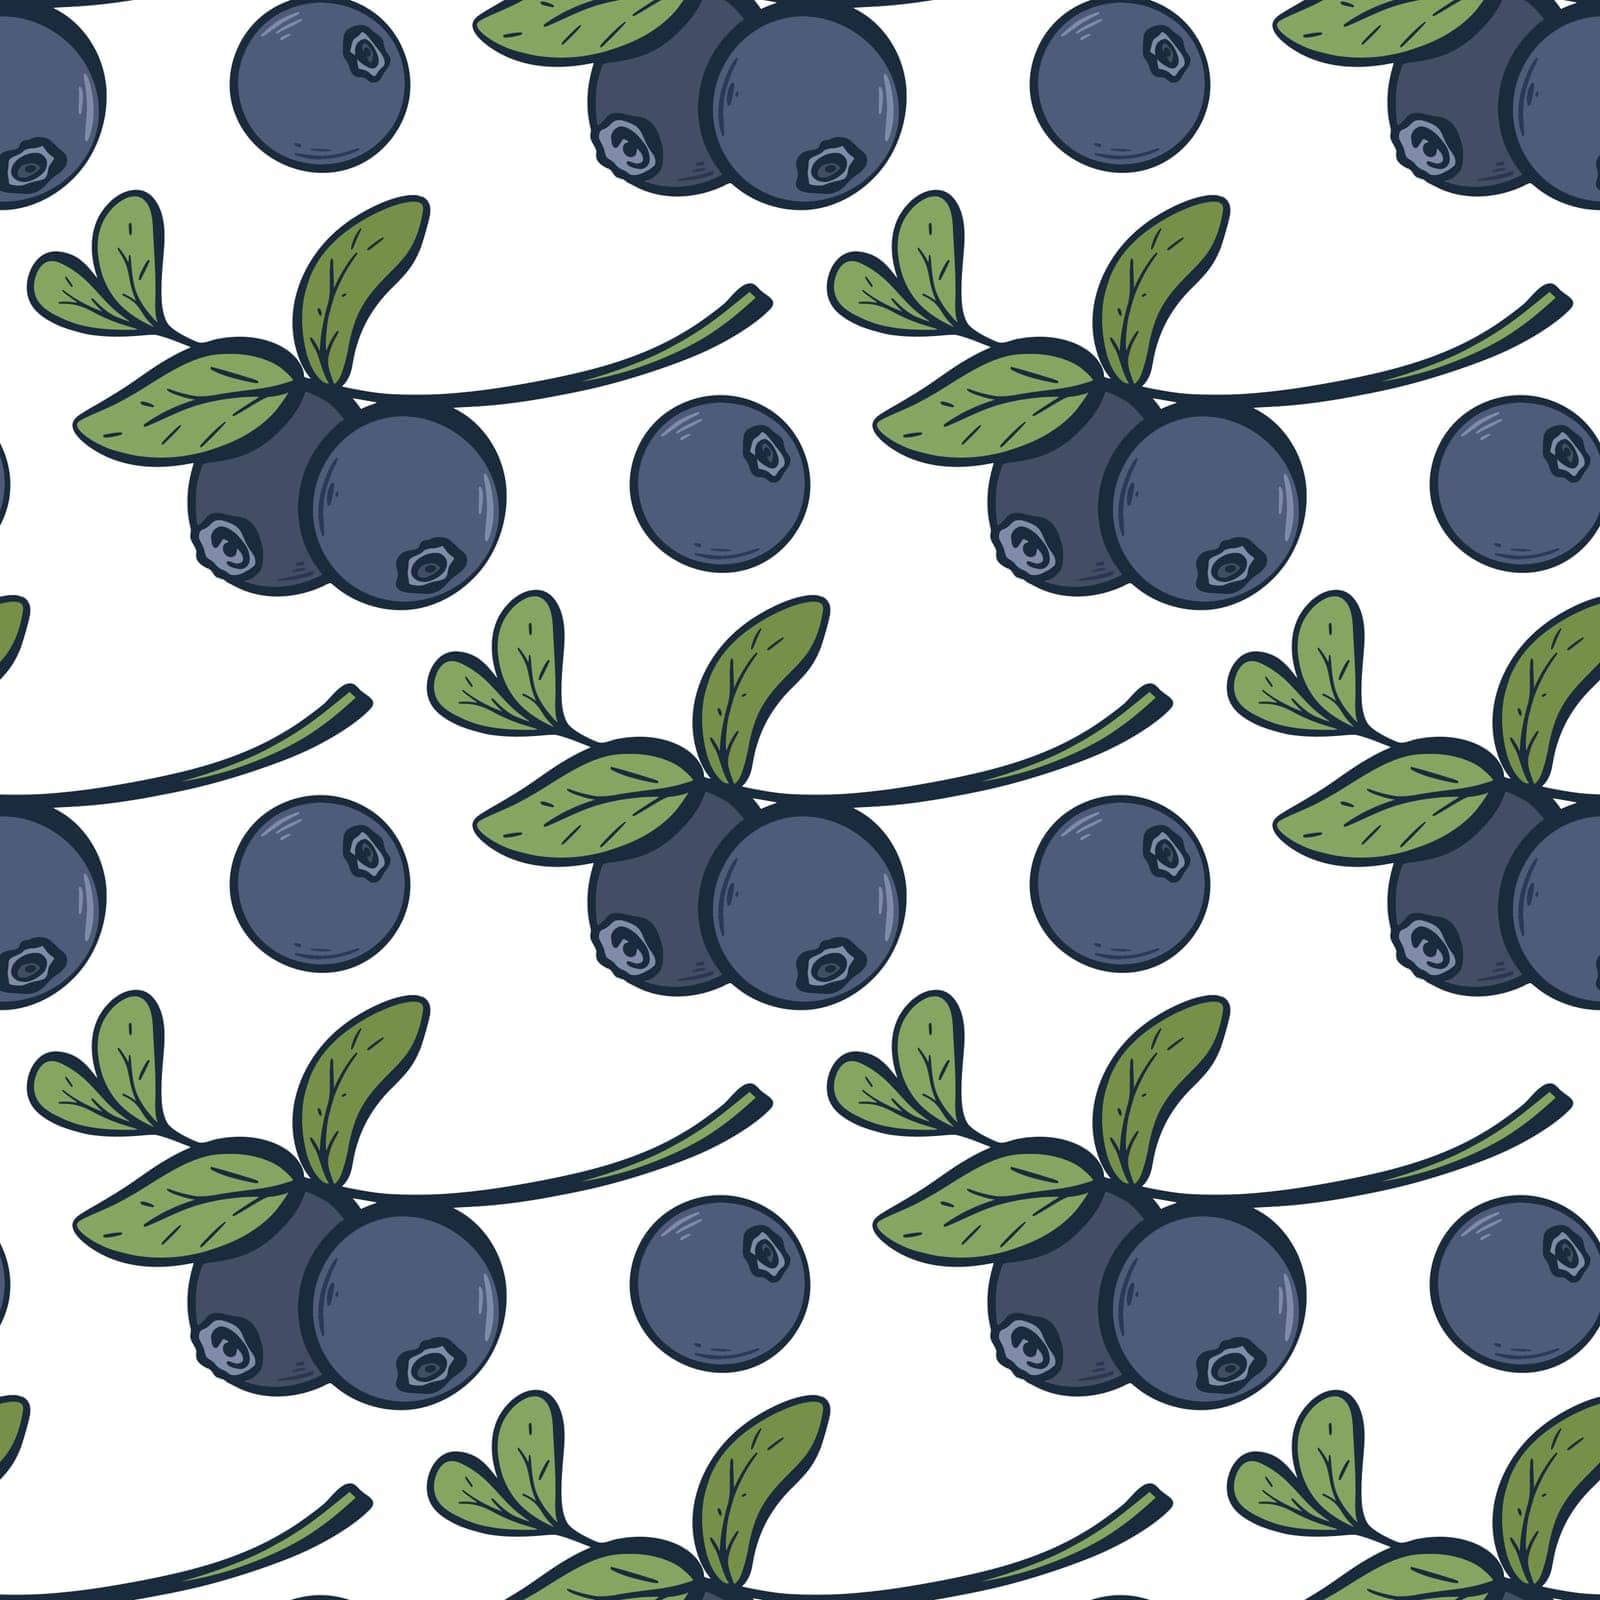 Blueberry engraved vintage seamless pattern. Wild berries background. Colored sketch of blueberries on branches. Healthy organic food, berry print for textile, packaging design, paper, vector illustration